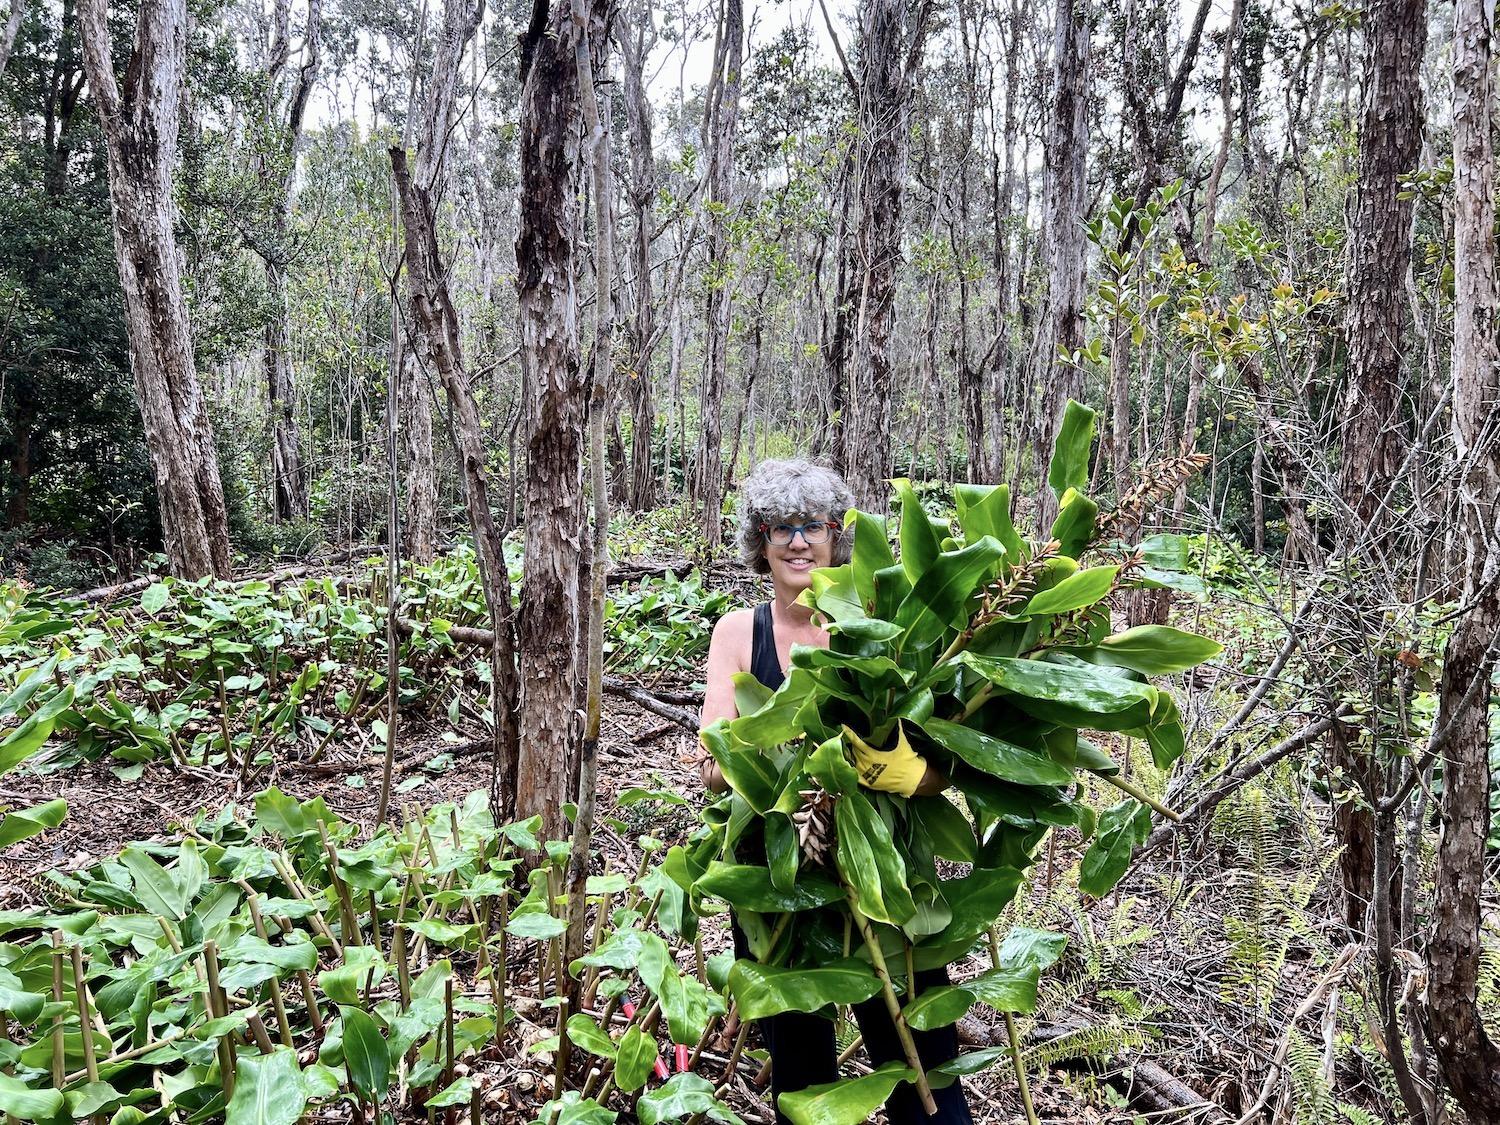 Writer Jennifer Bain holds an armful of invasive Himalayan ginger that she has cut and is about to pile in the rainforest at Hawai'i Volcanoes National Park.